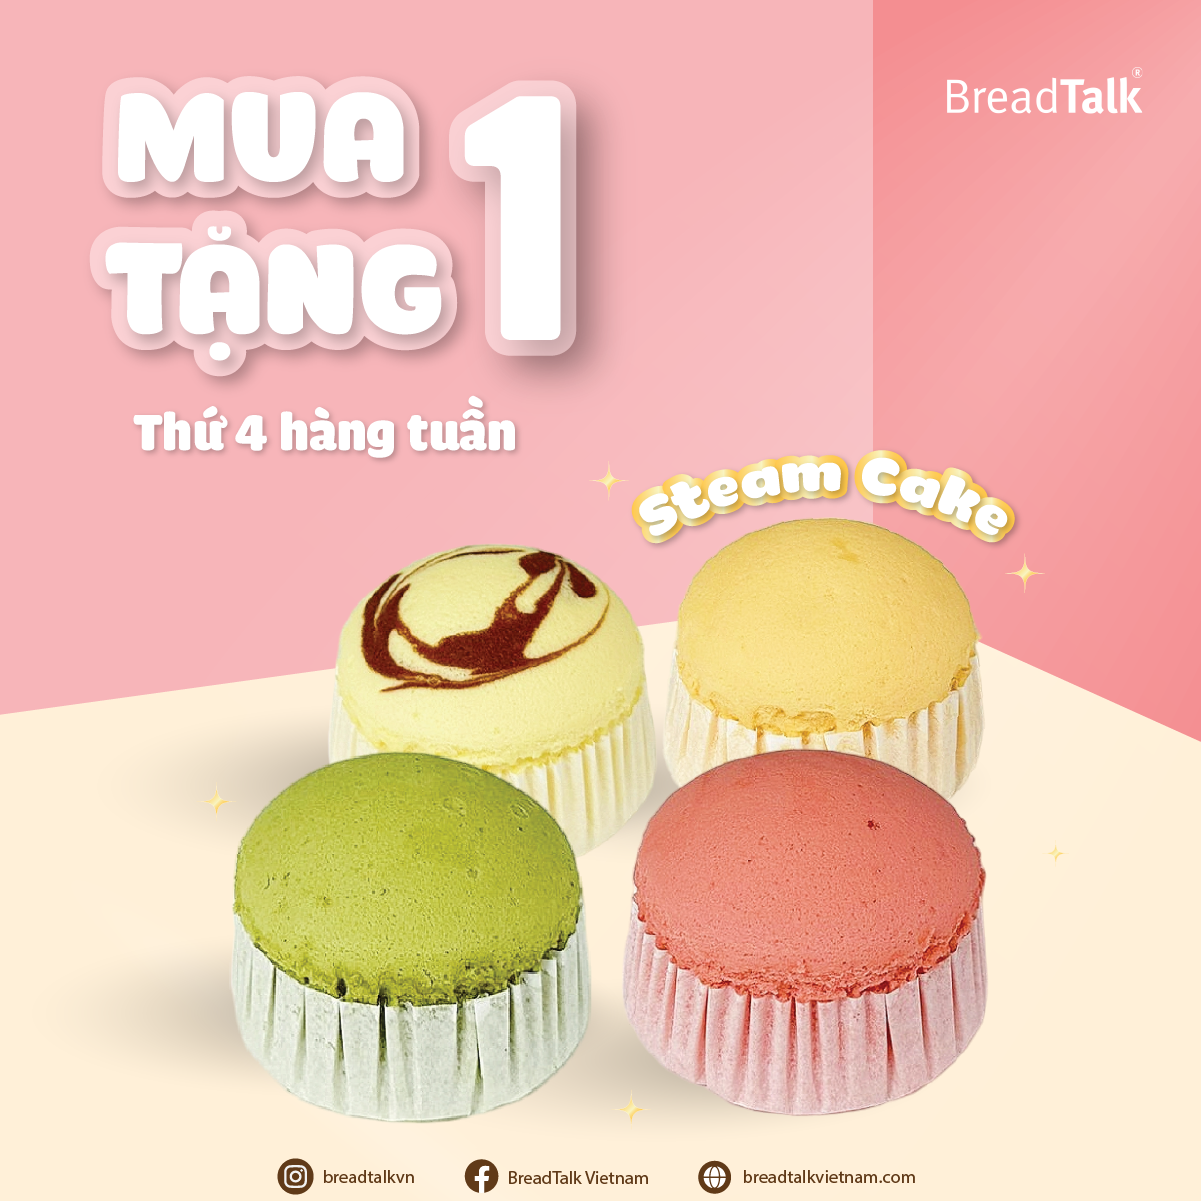 HAPPY WEDNESDAY - STEAMCAKE BUY 1 GET 1 FREE